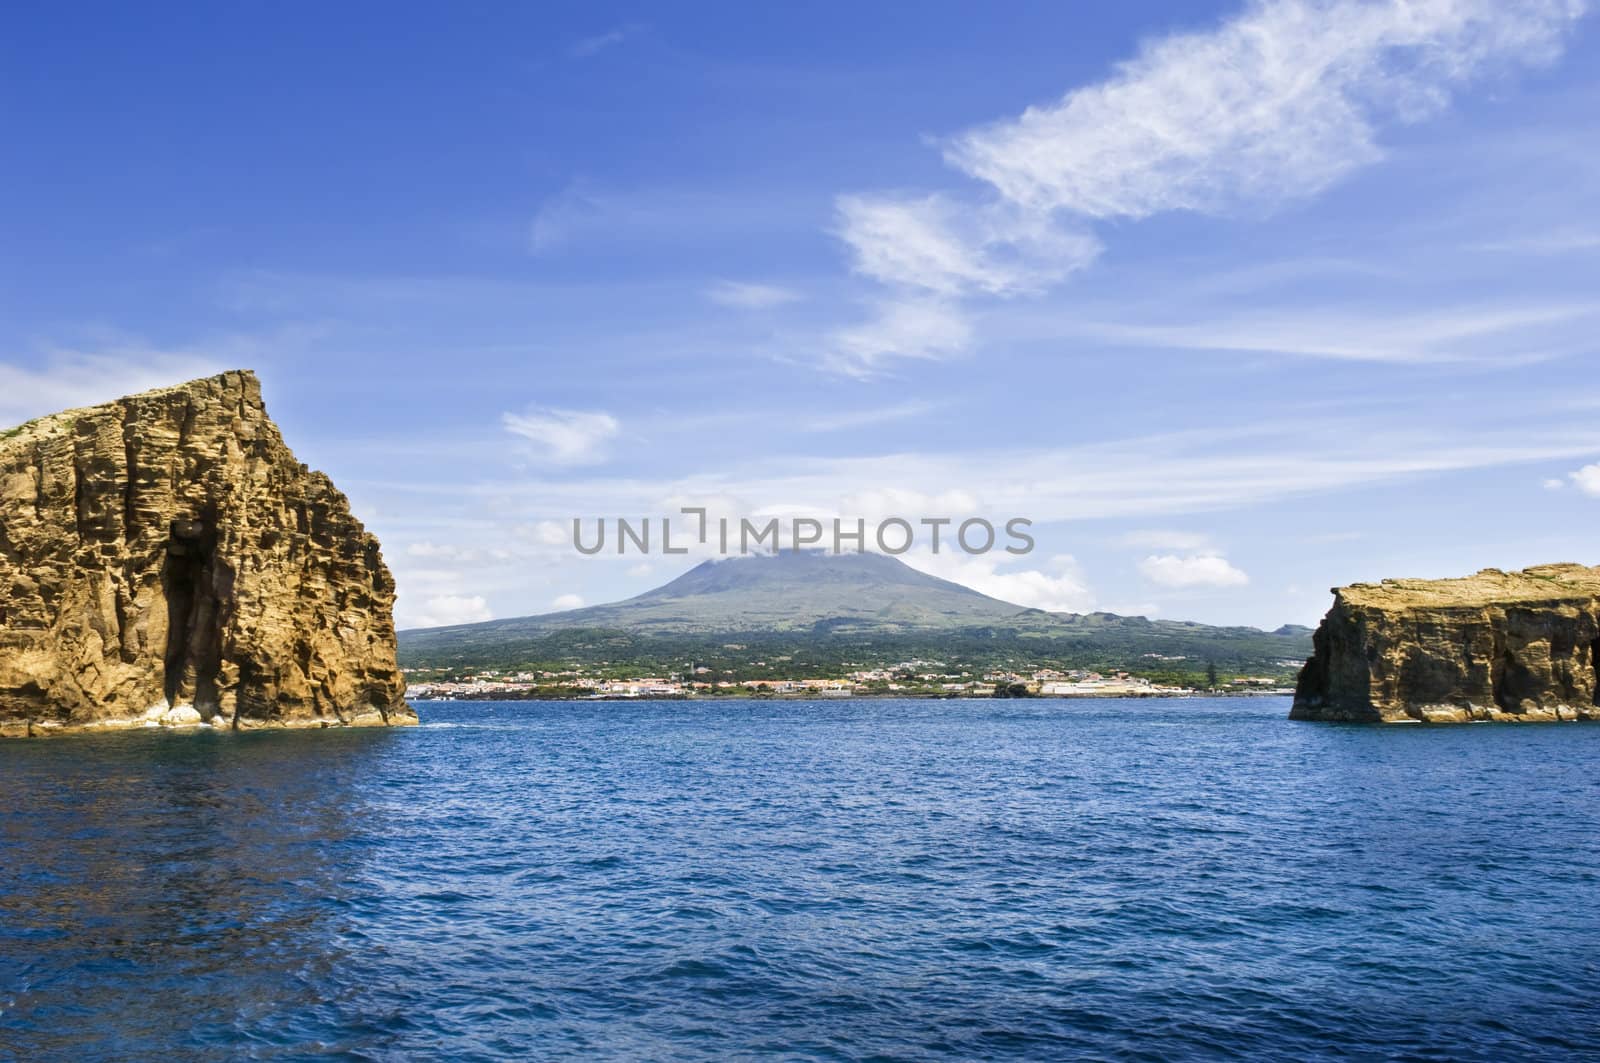 View from the sea of Pico Island, the volcano and the village of Madalena between two islets
